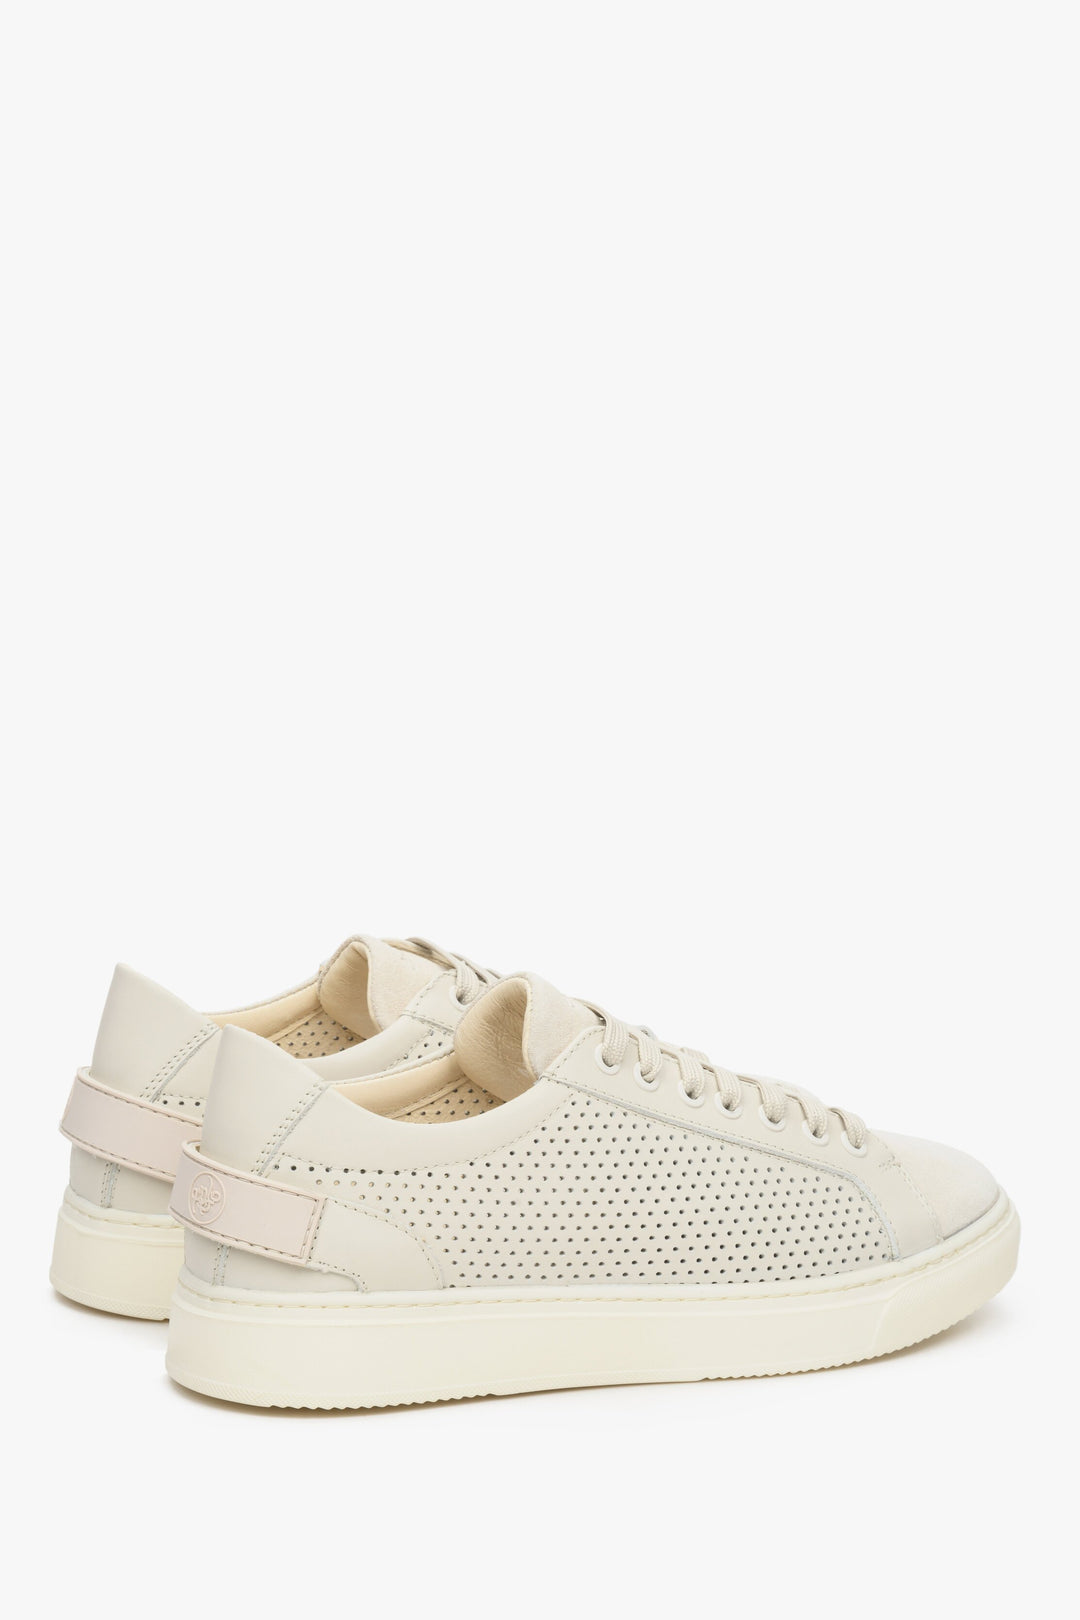 Women's beige leather Estro sneakers with perforation for fall/spring - close-up on the heel and side seam.